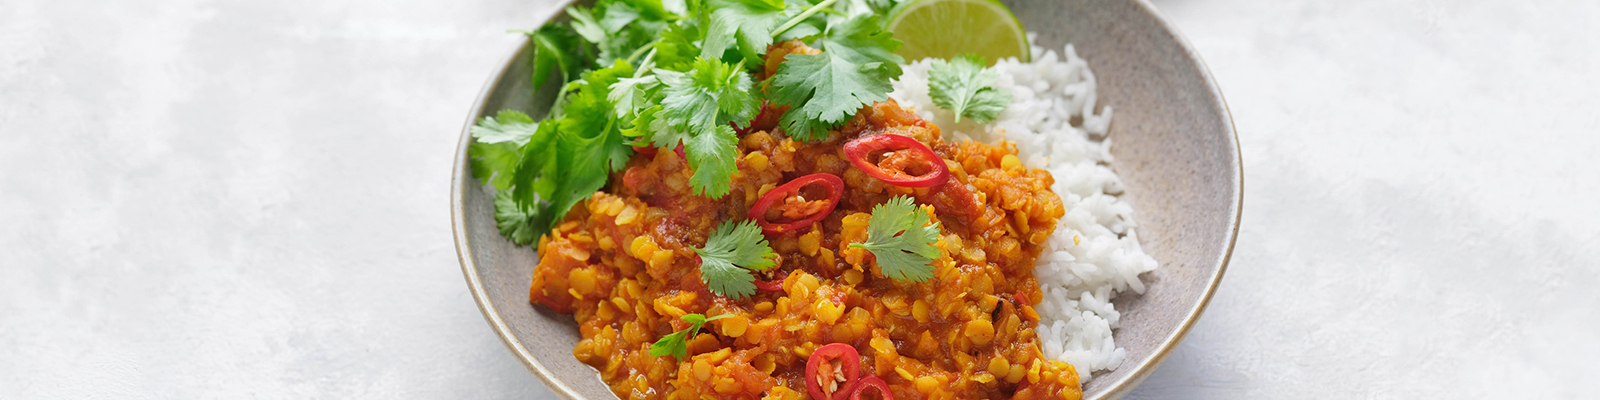 Spicy Red Lentil Dhal with Chilli & Coriander